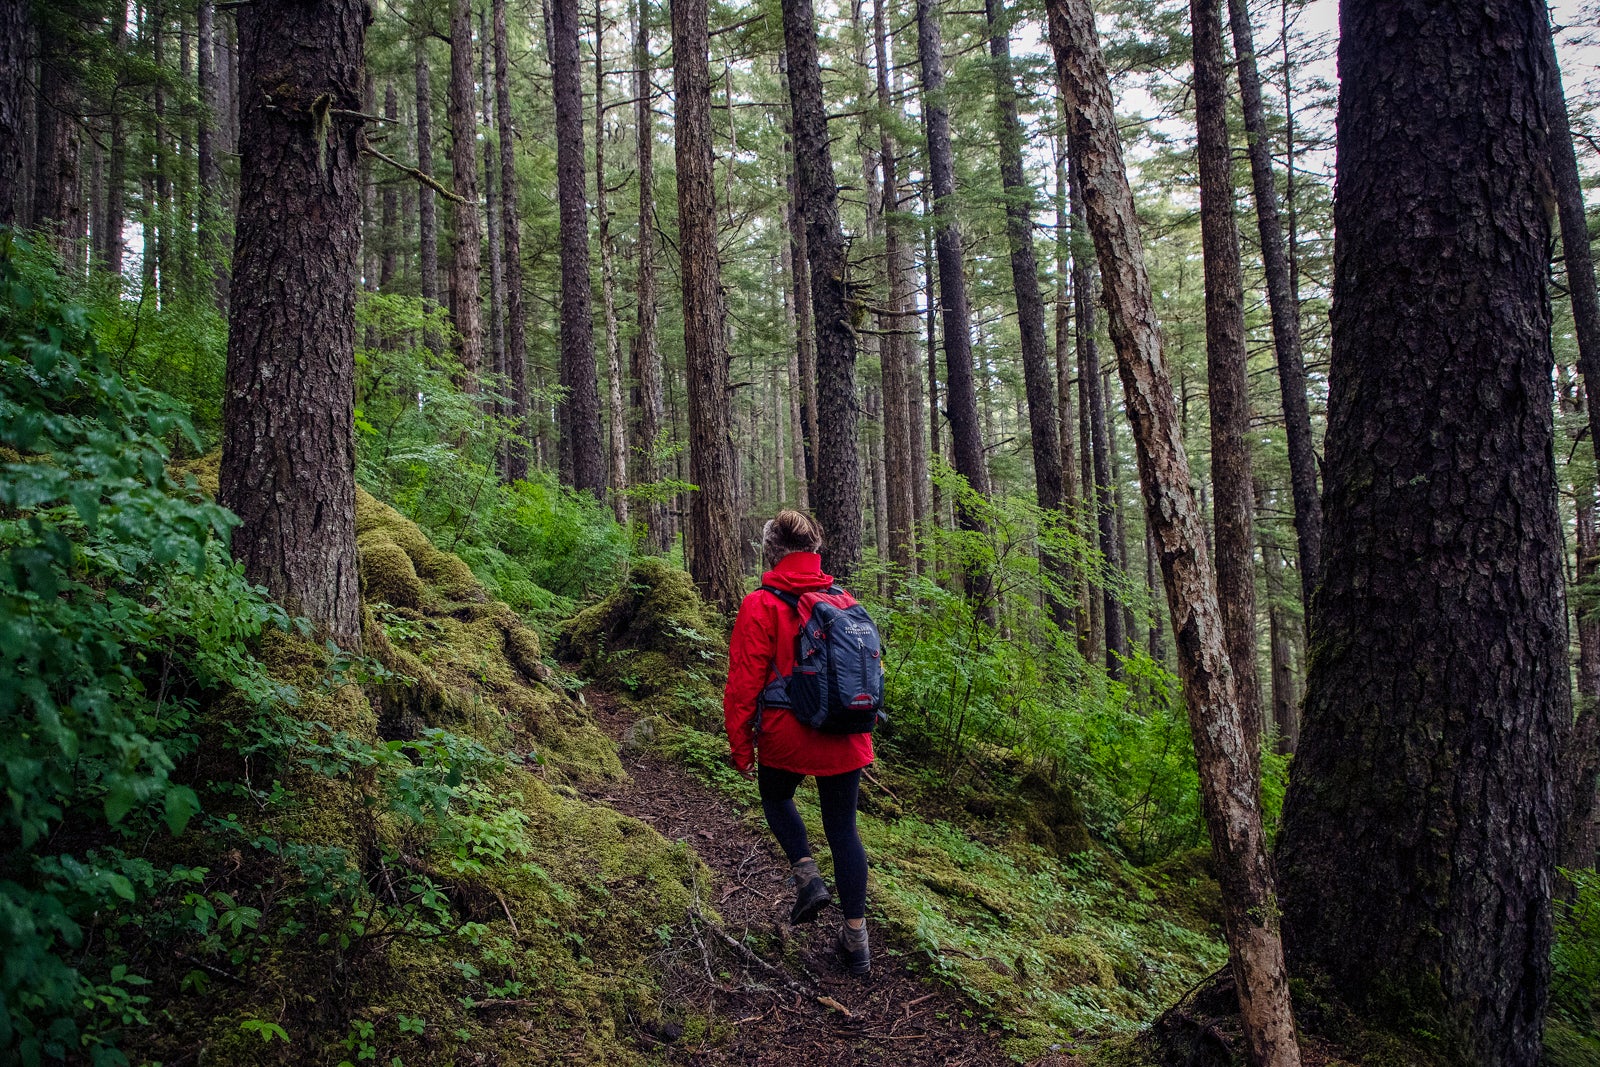 Woman in red jacket with backpack hiking in an Alaskan forest